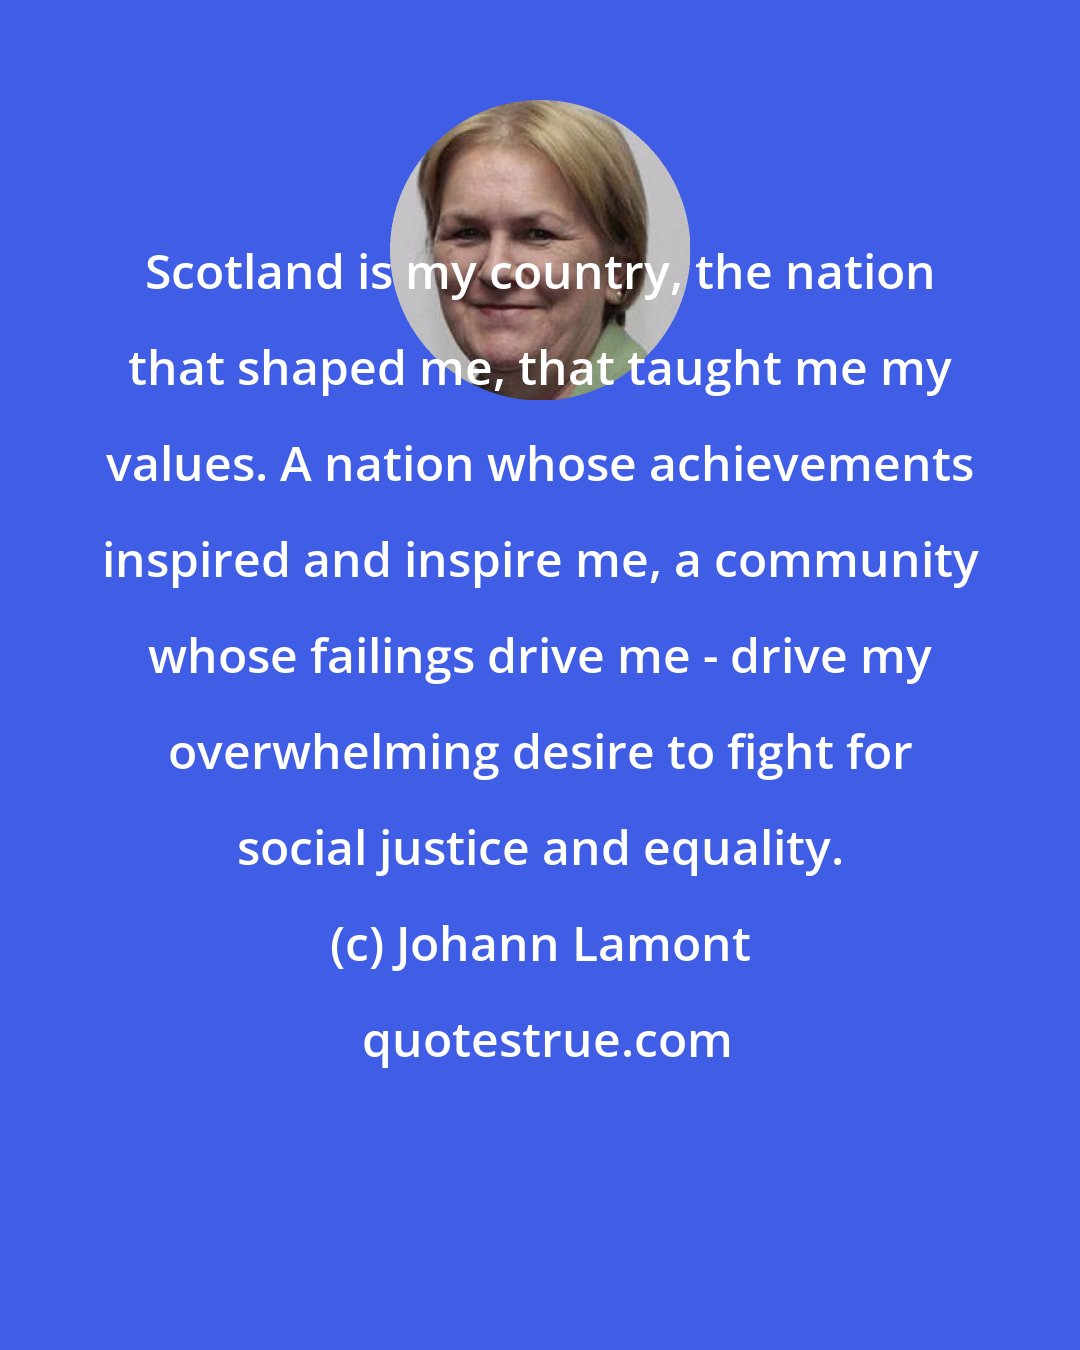 Johann Lamont: Scotland is my country, the nation that shaped me, that taught me my values. A nation whose achievements inspired and inspire me, a community whose failings drive me - drive my overwhelming desire to fight for social justice and equality.